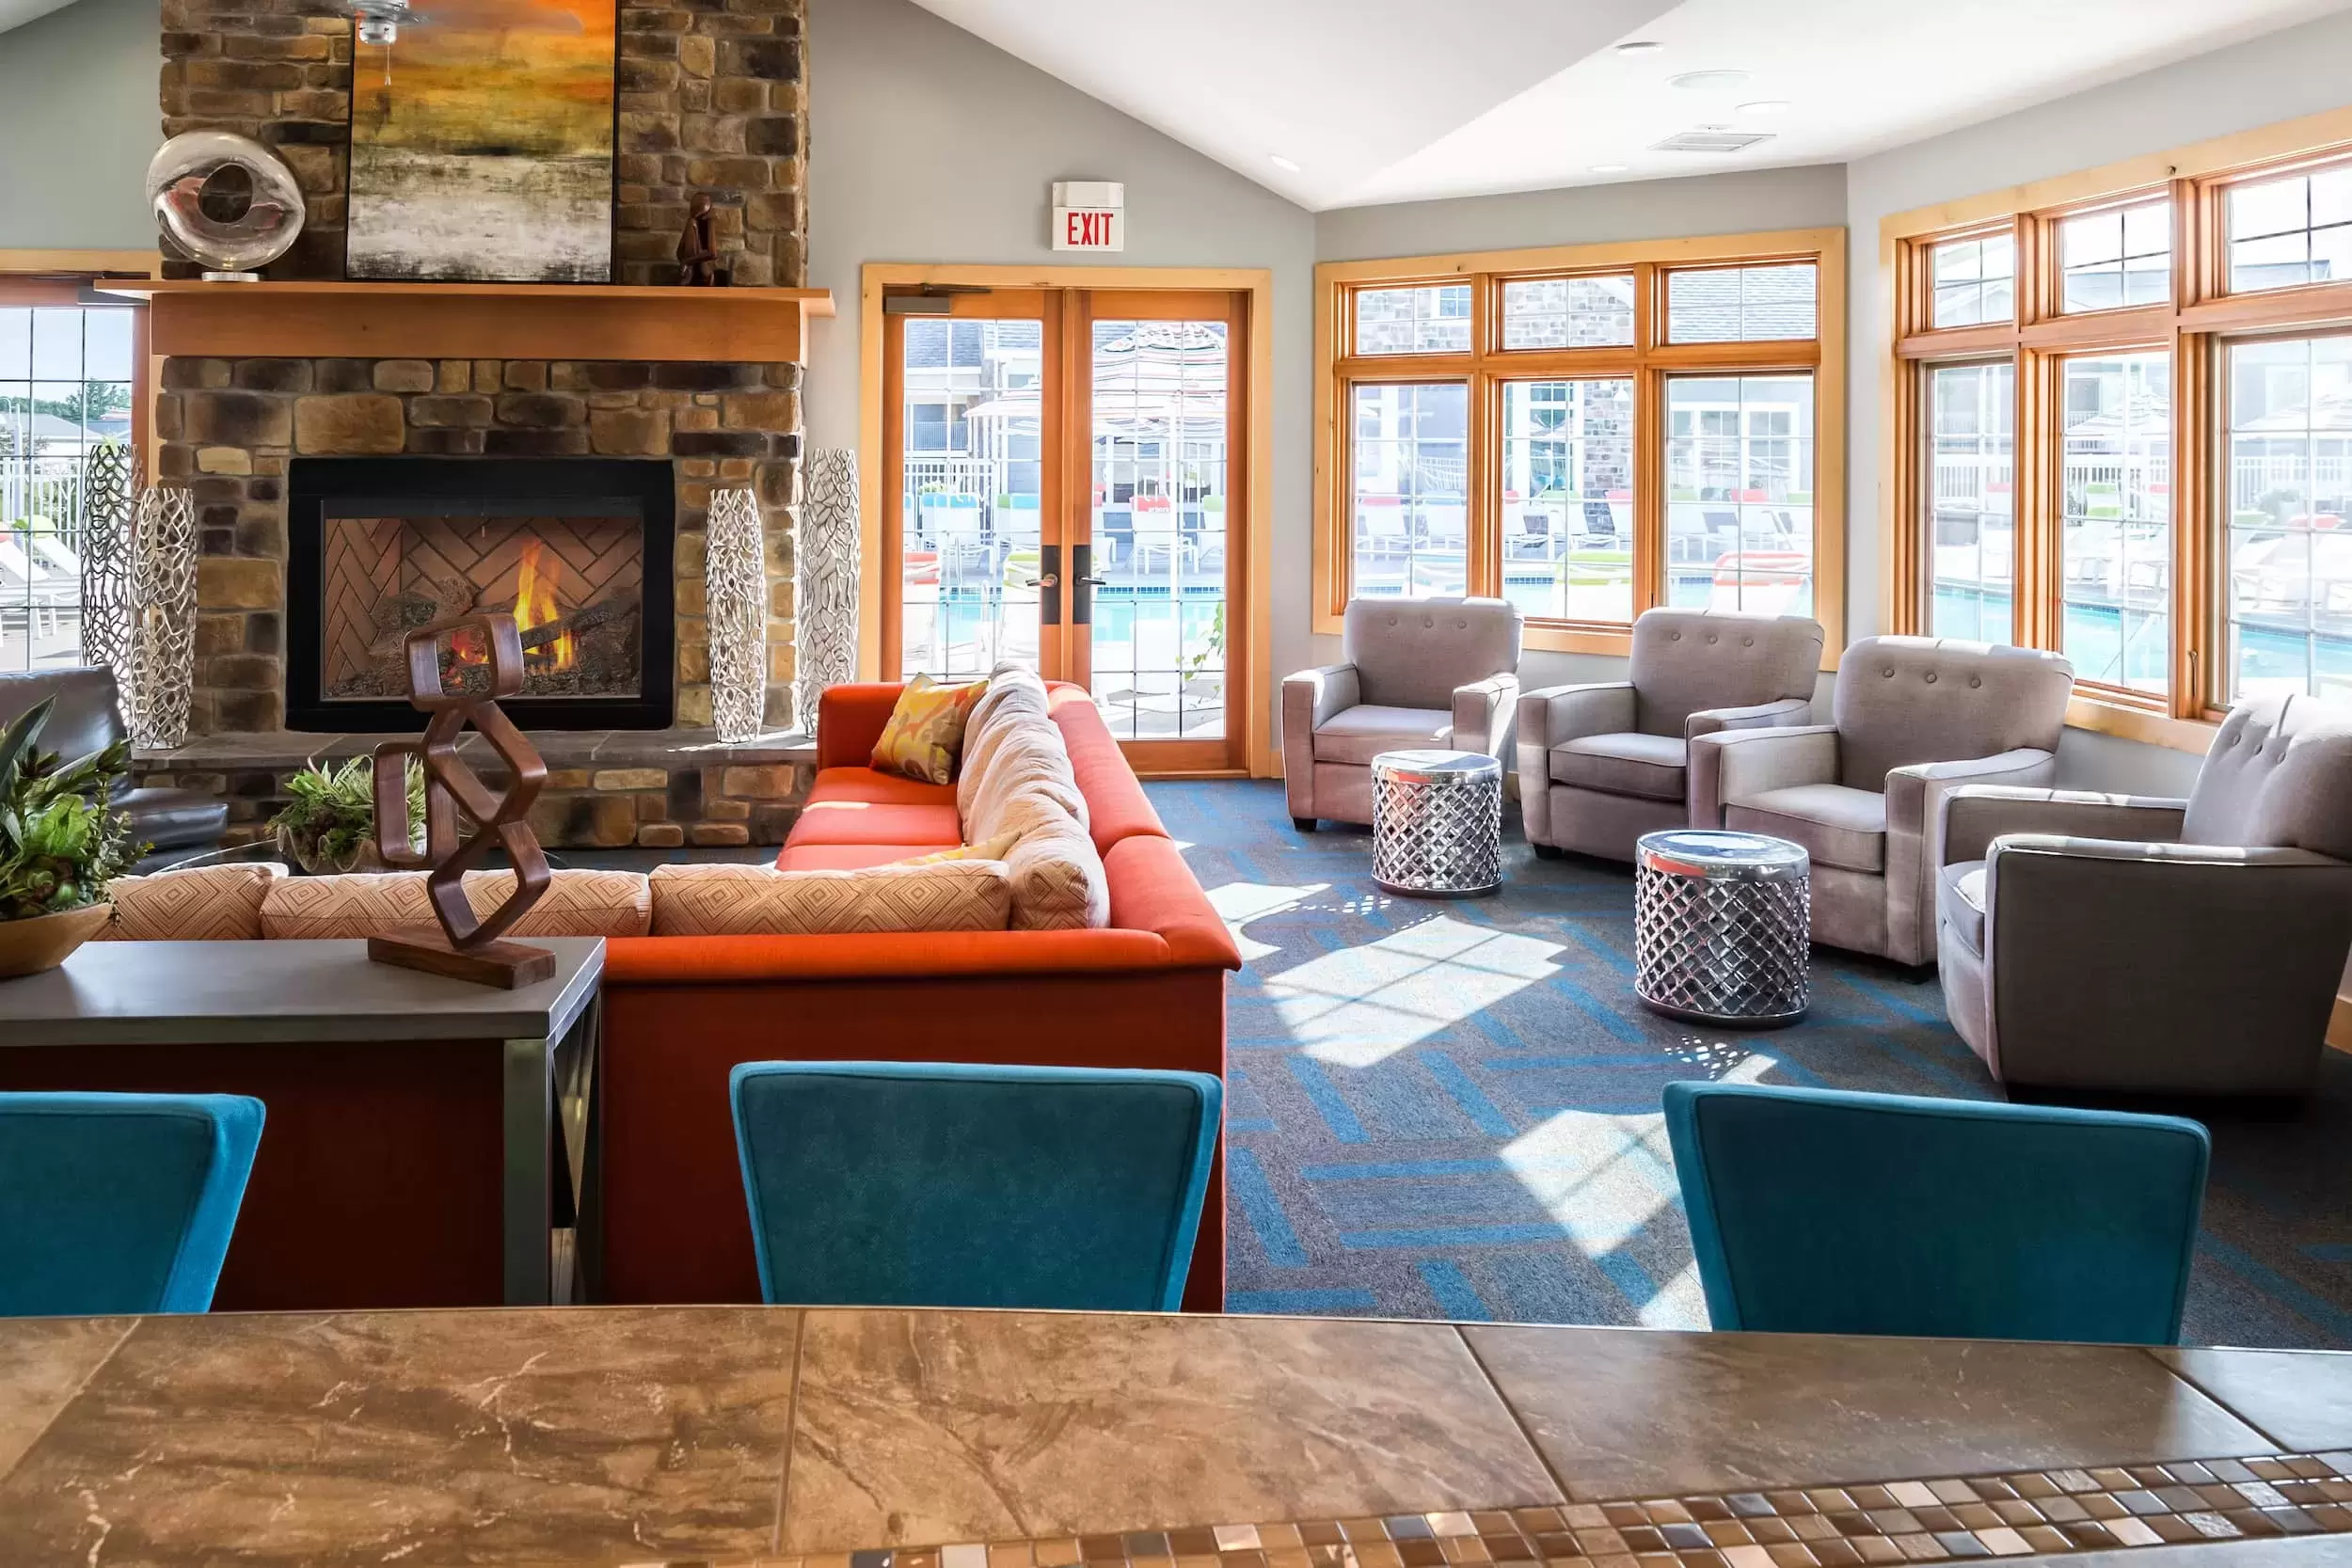 In the Resident Hub a big comfy couch and chairs sit in front of a large stone fireplace.